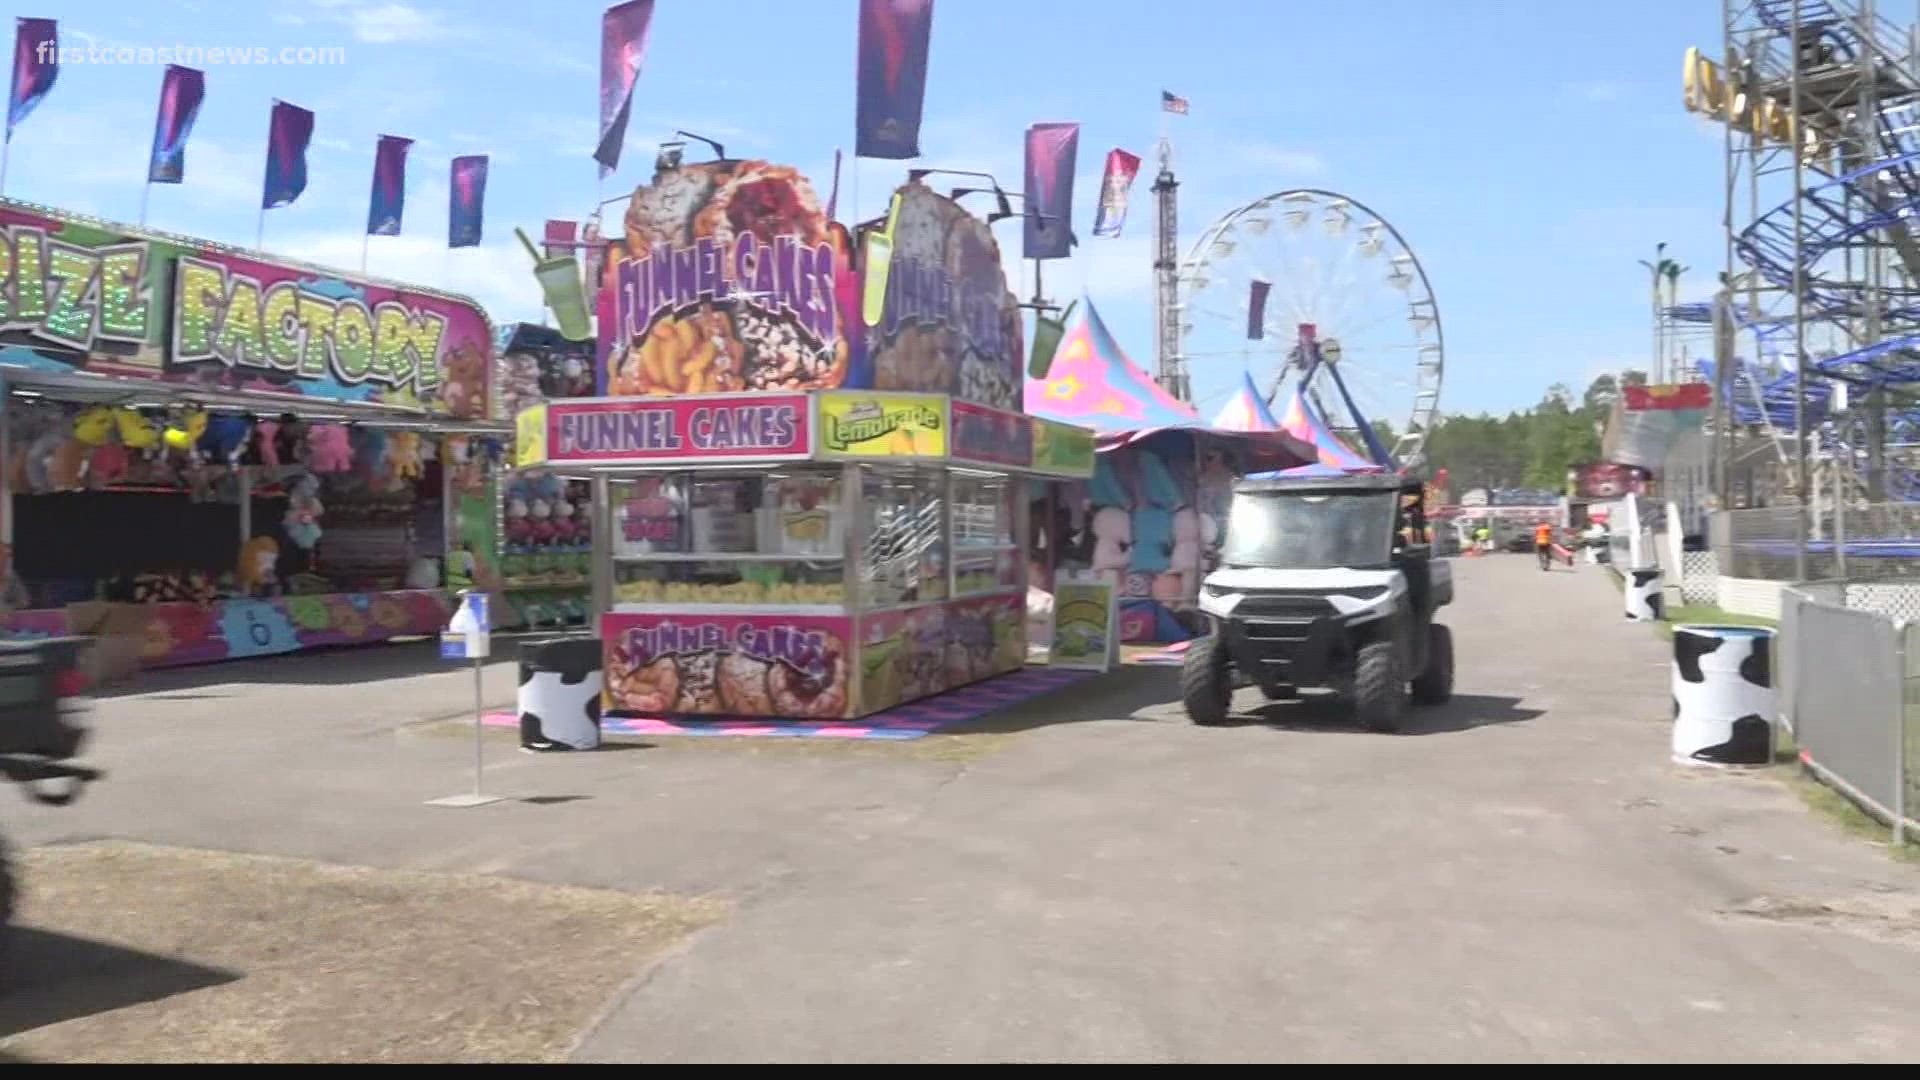 Safety is their first priority here at the Clay County fair.  State inspectors have been making sure all the rides are up to standard.